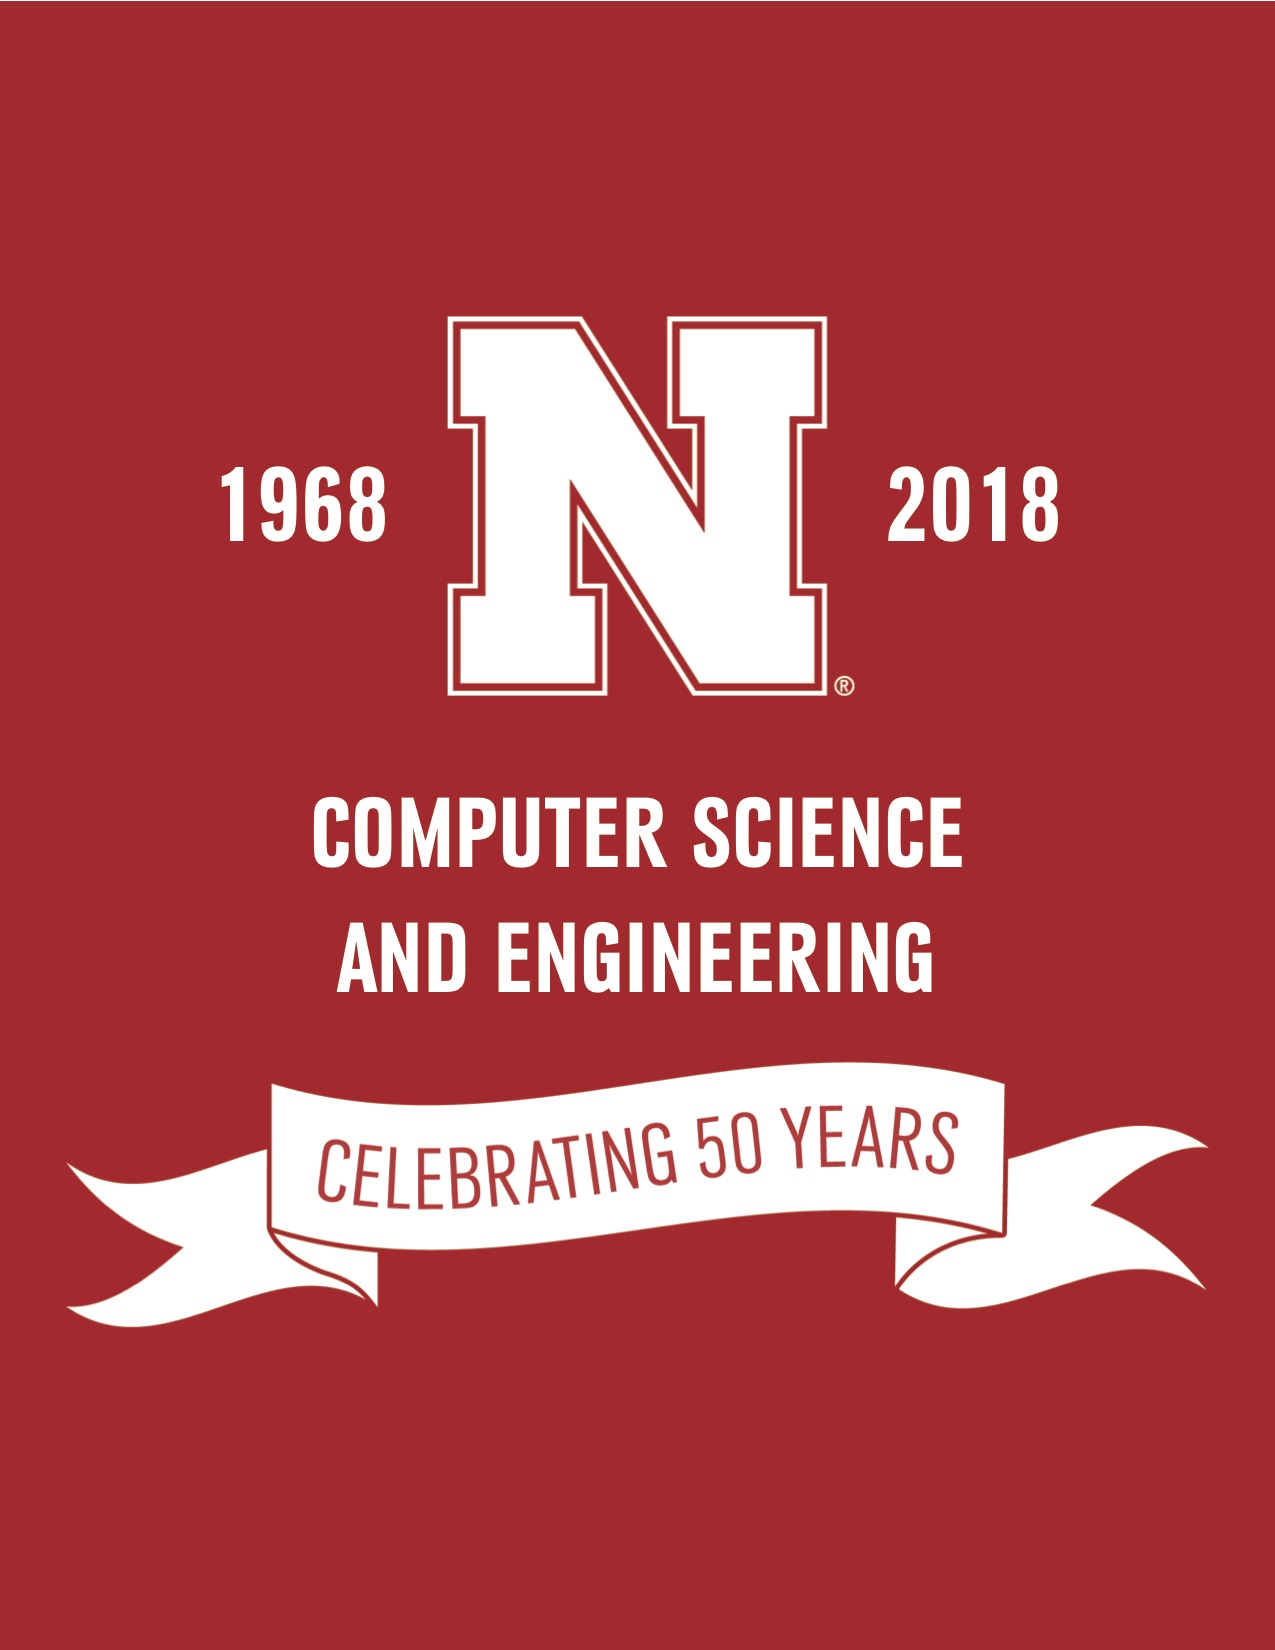 CSE is celebrating 50 years in 2018.